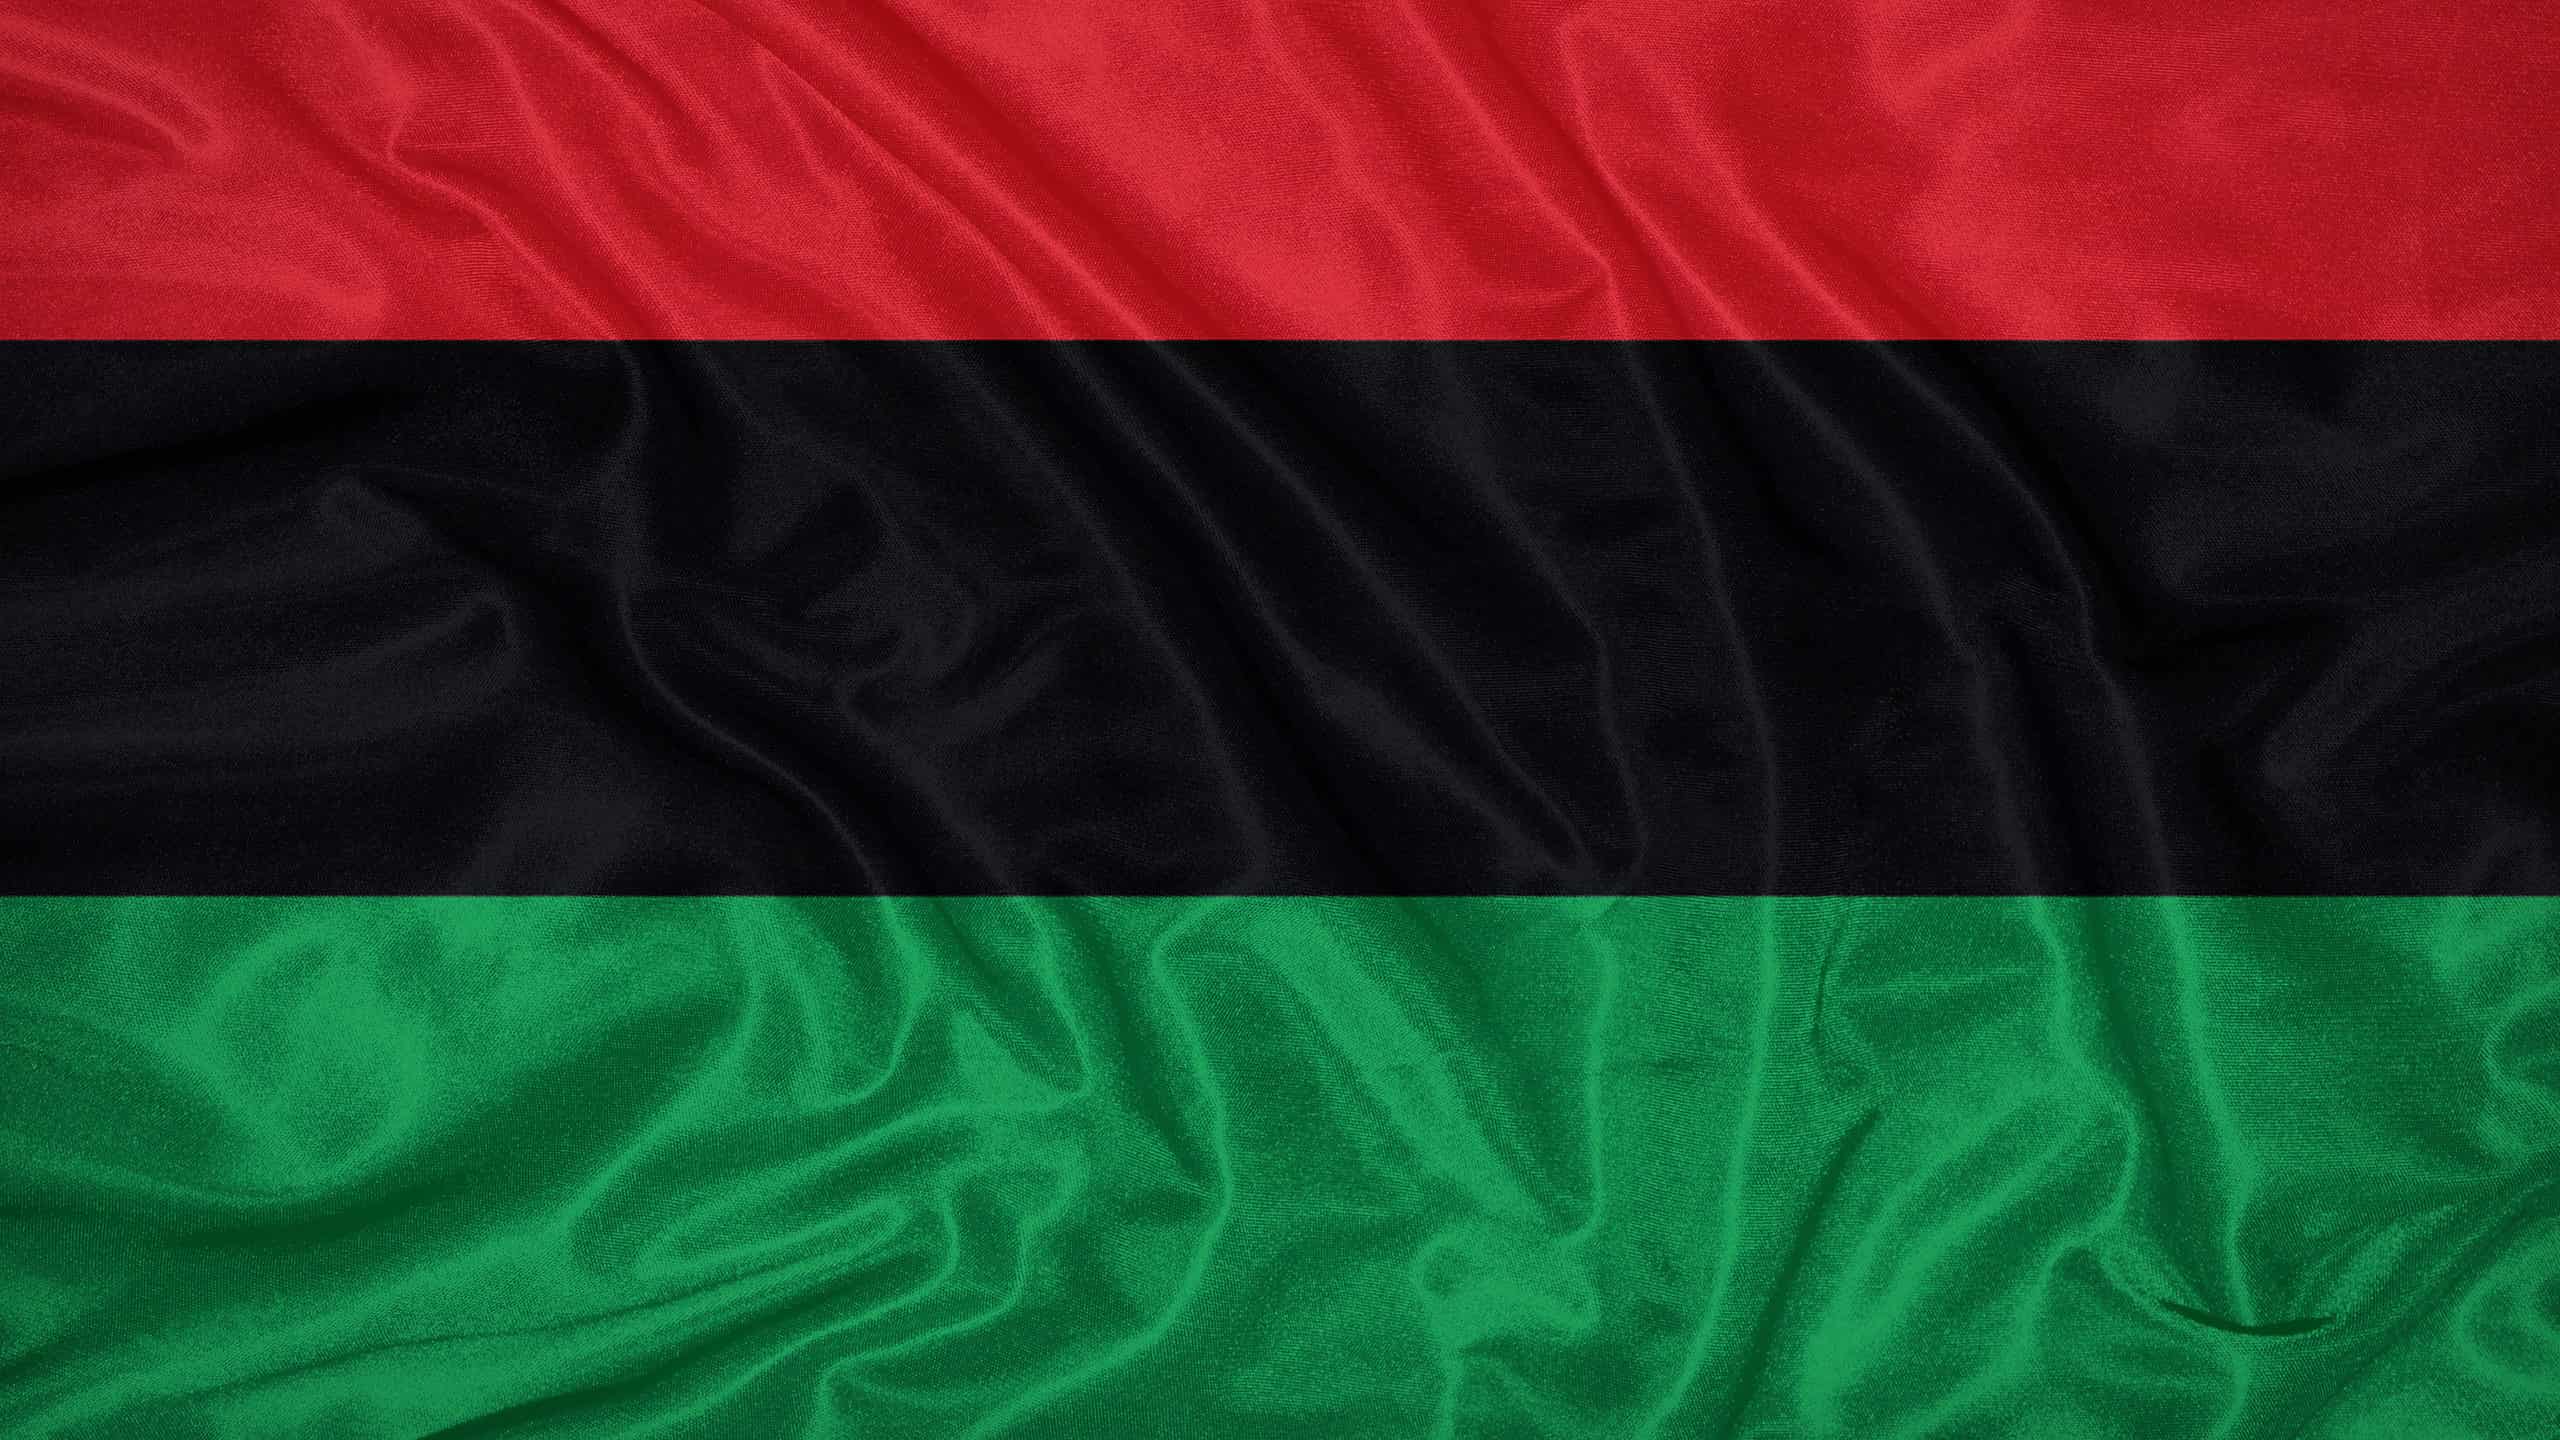 fårehyrde kage Perversion Black, Red, and Green Flag: The History and Meaning of the Pan-African Flag  - AZ Animals